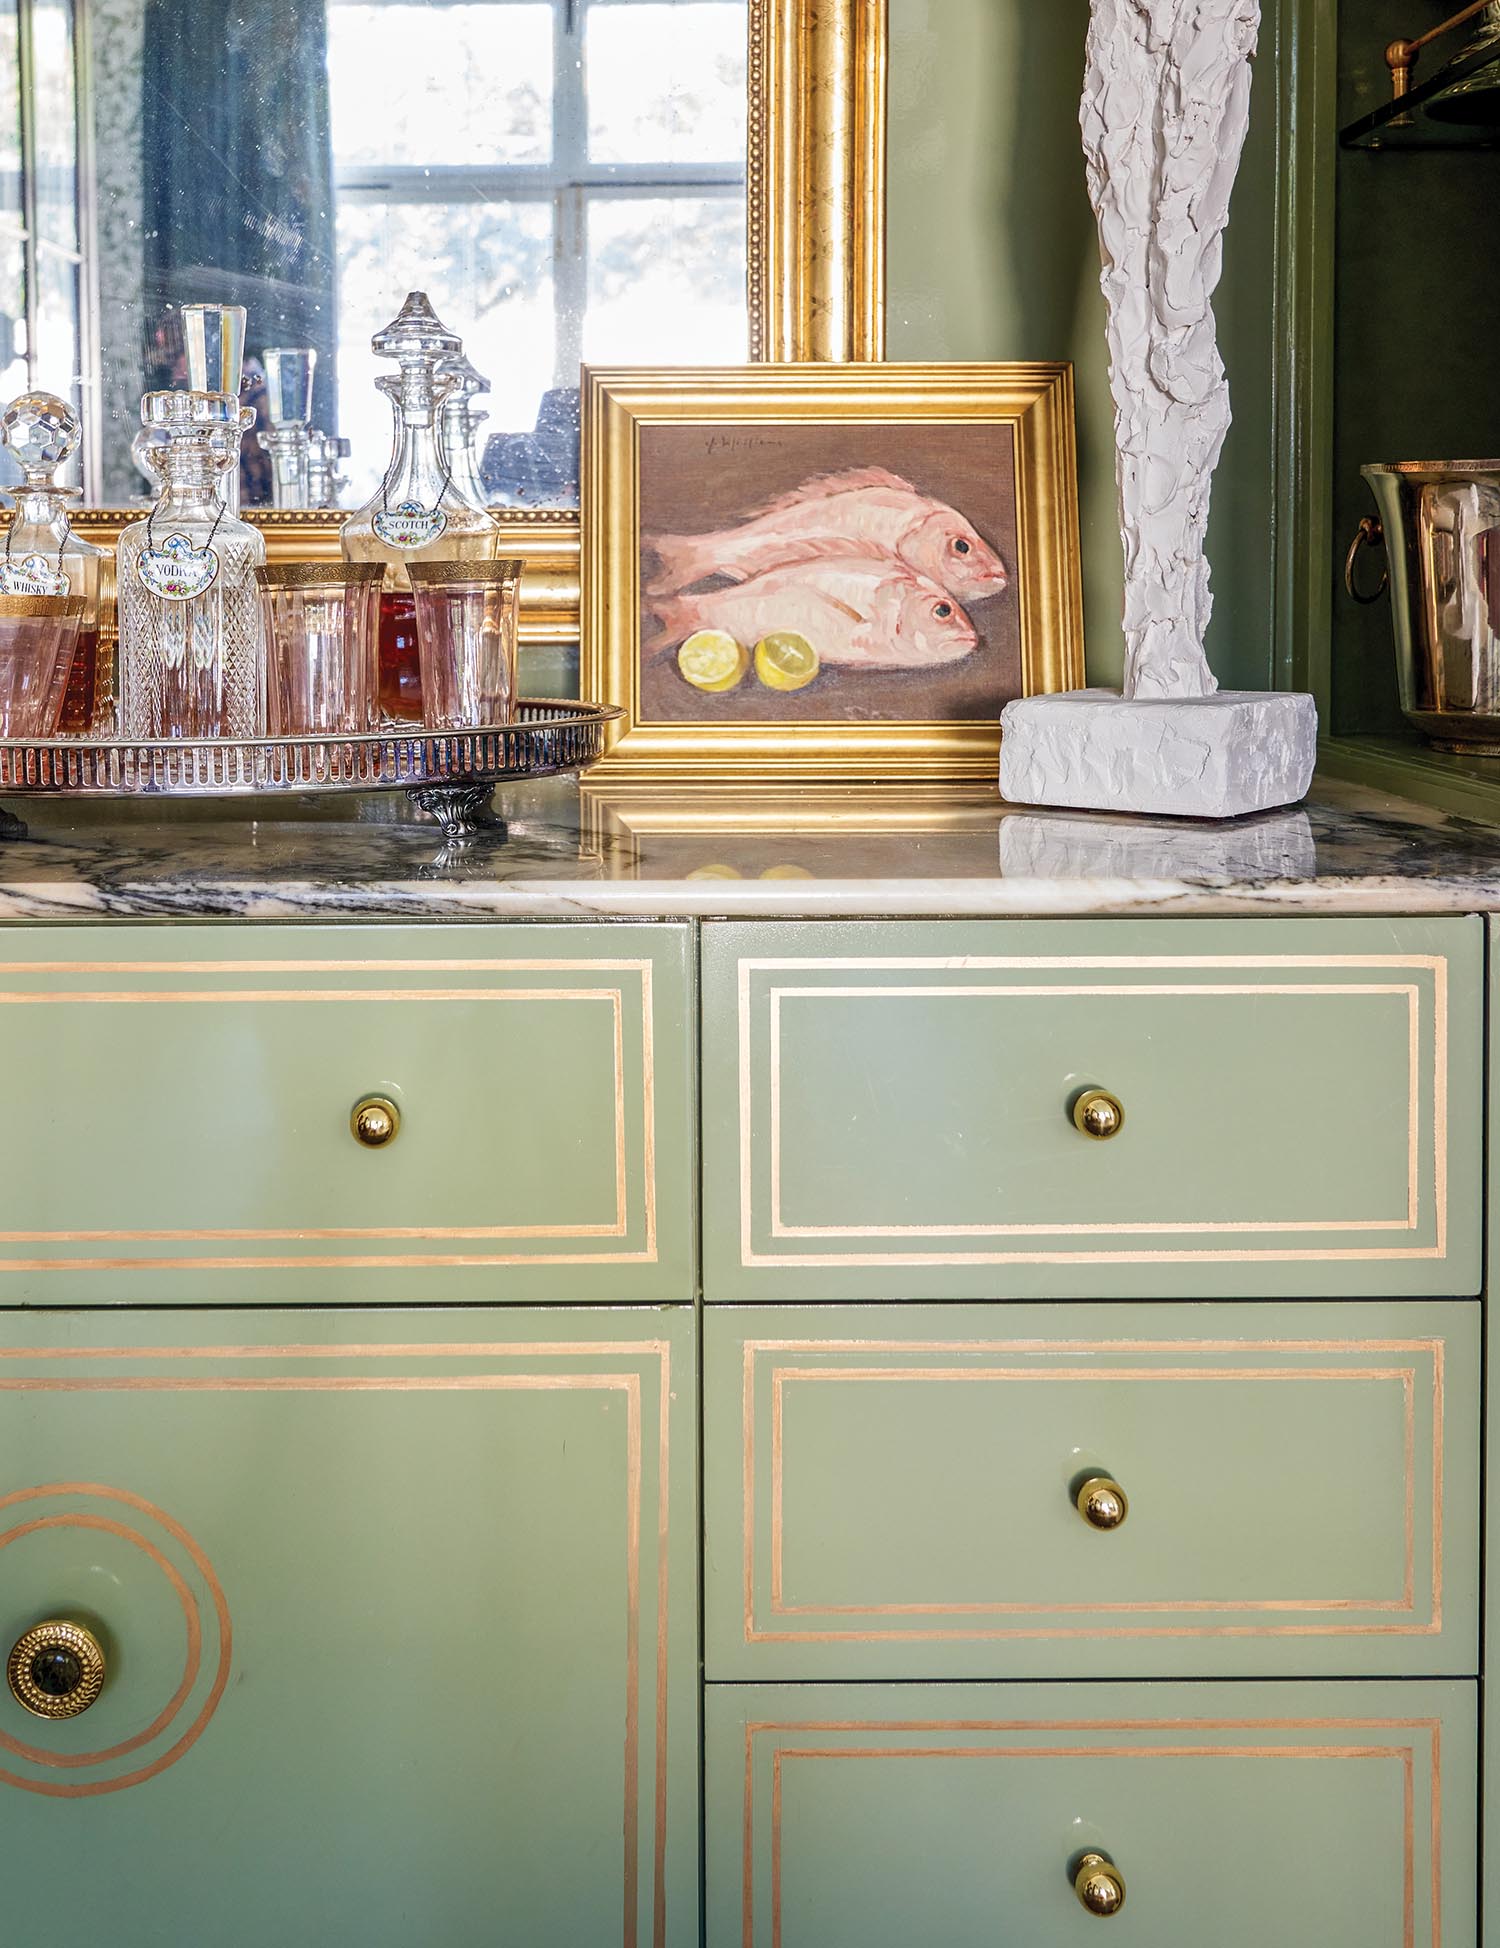 A green cabinet has gold painted accents and knobs.